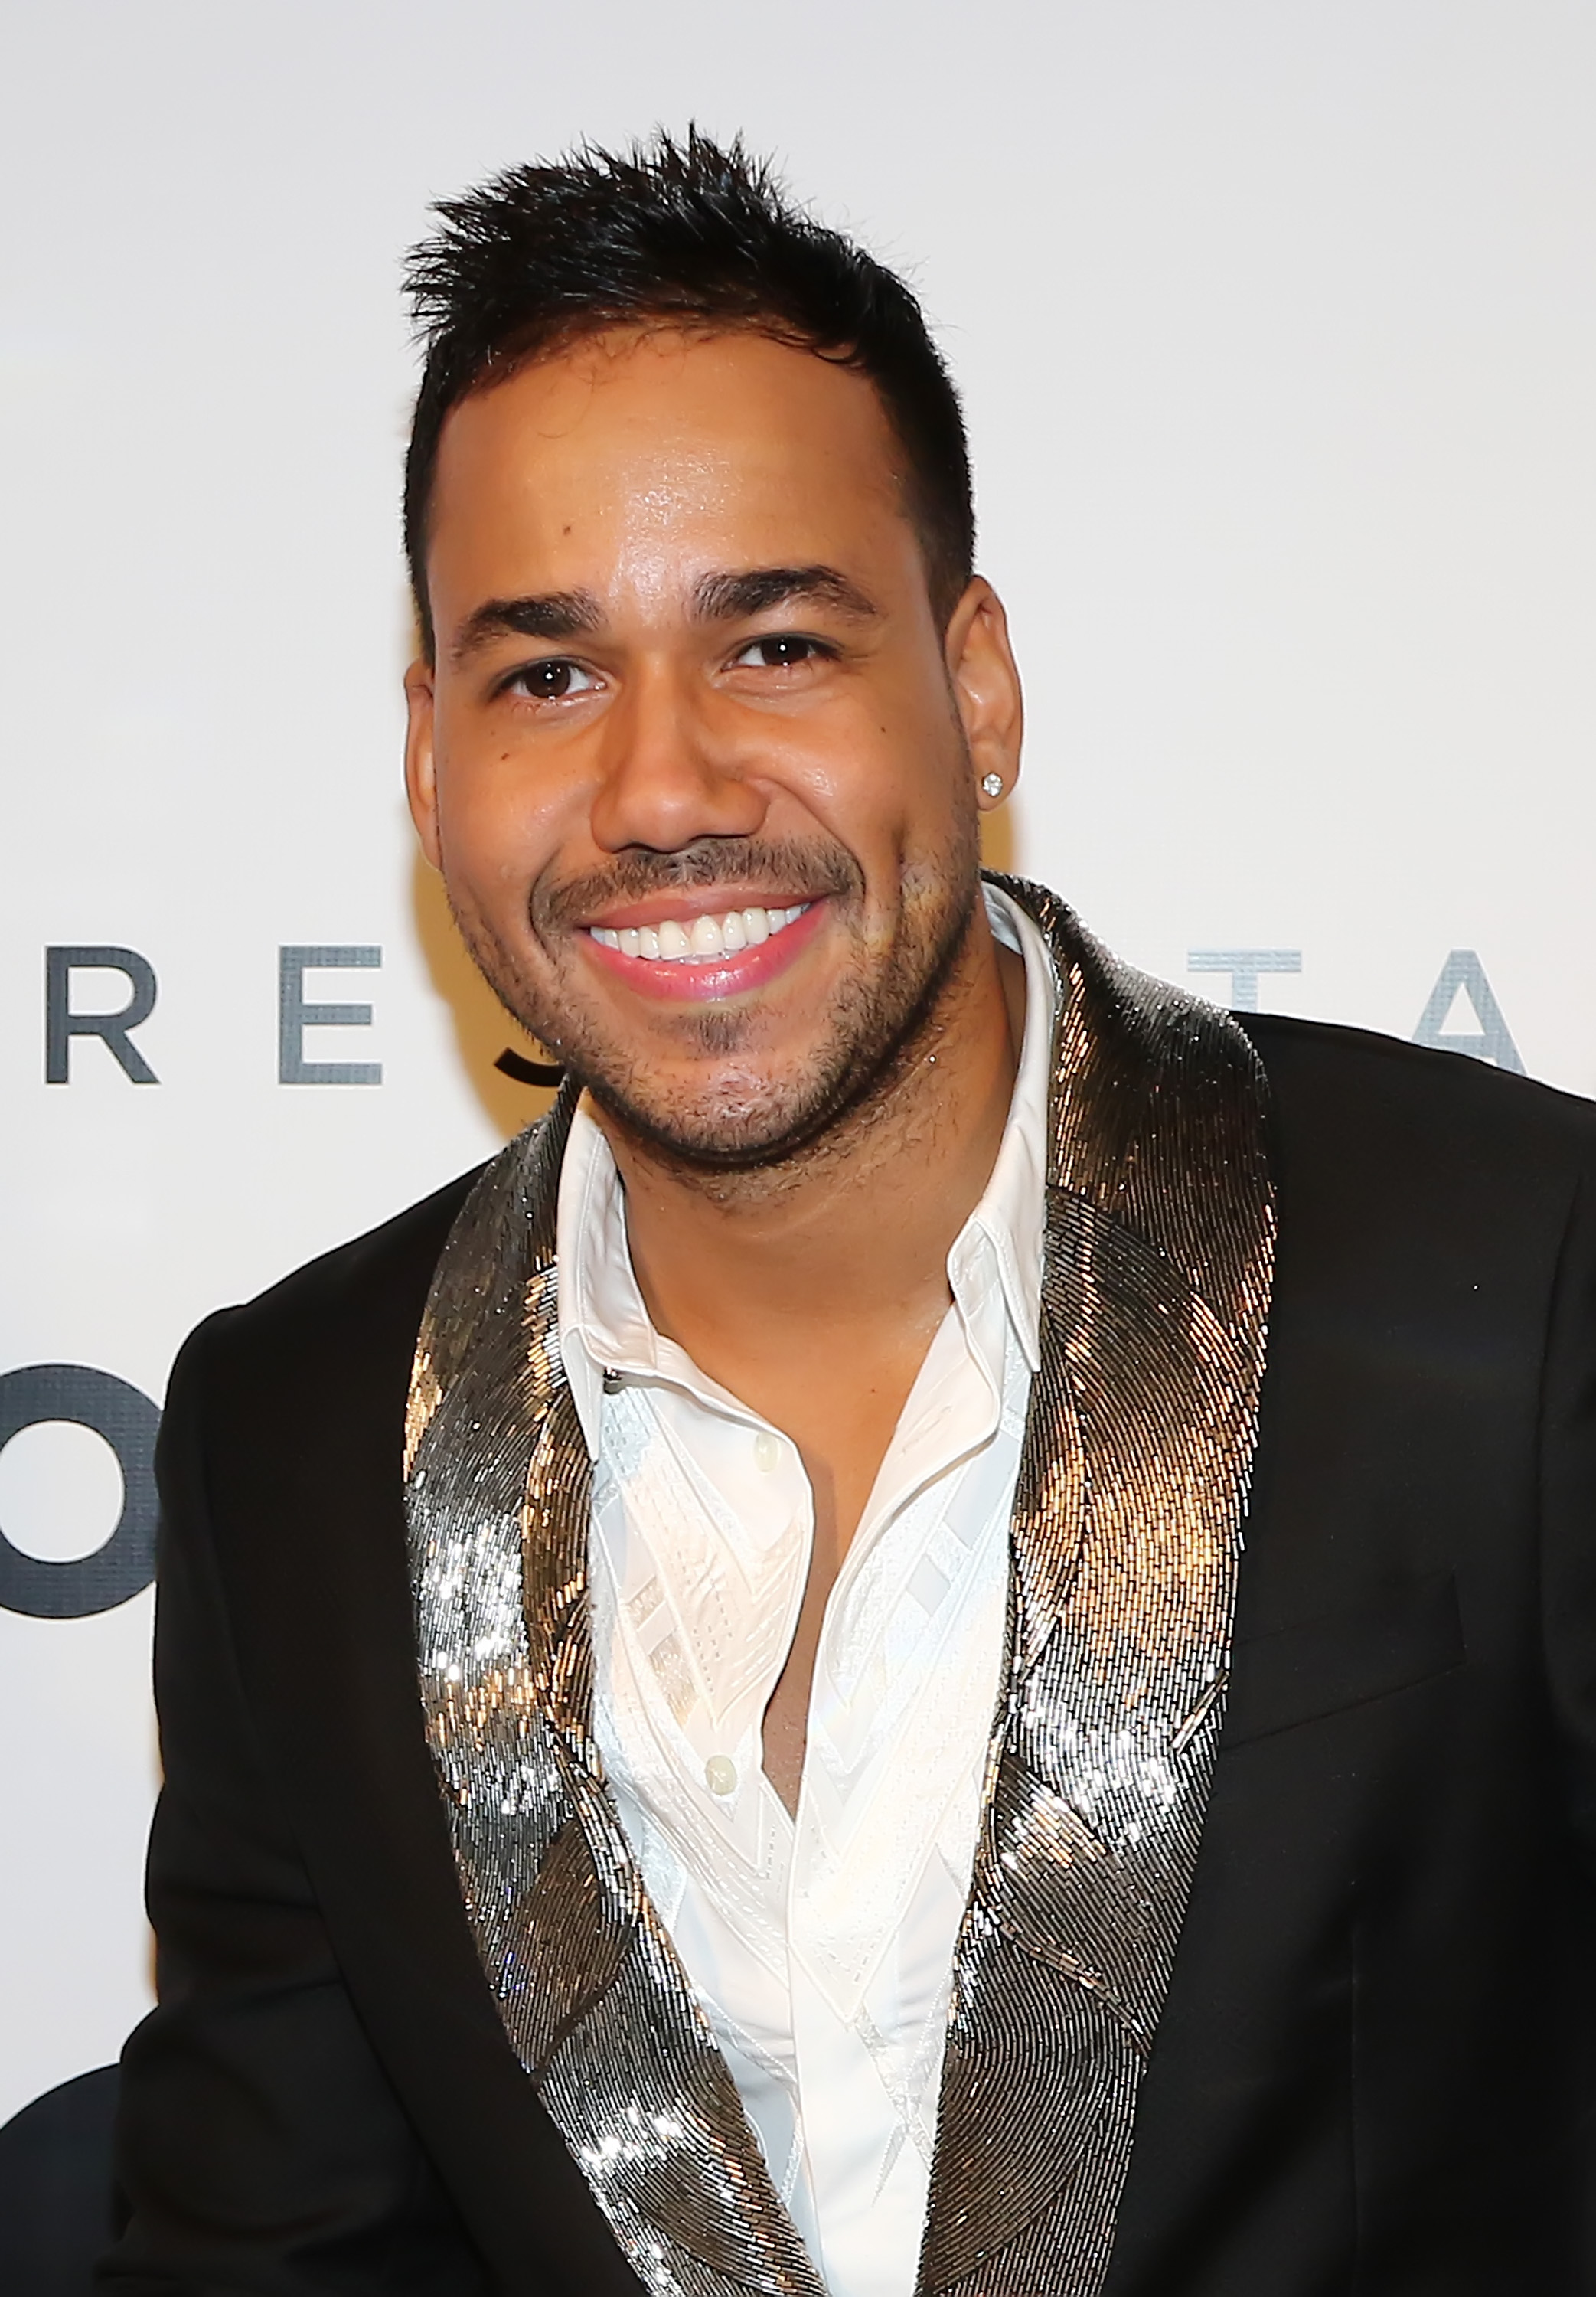 Romeo Santos poses backstage at the 2015 Billboard Latin Music Awards presented by State Farm on Telemundo at Bank United Center on April 30, 2015, in Miami, Florida. | Source: Getty Images